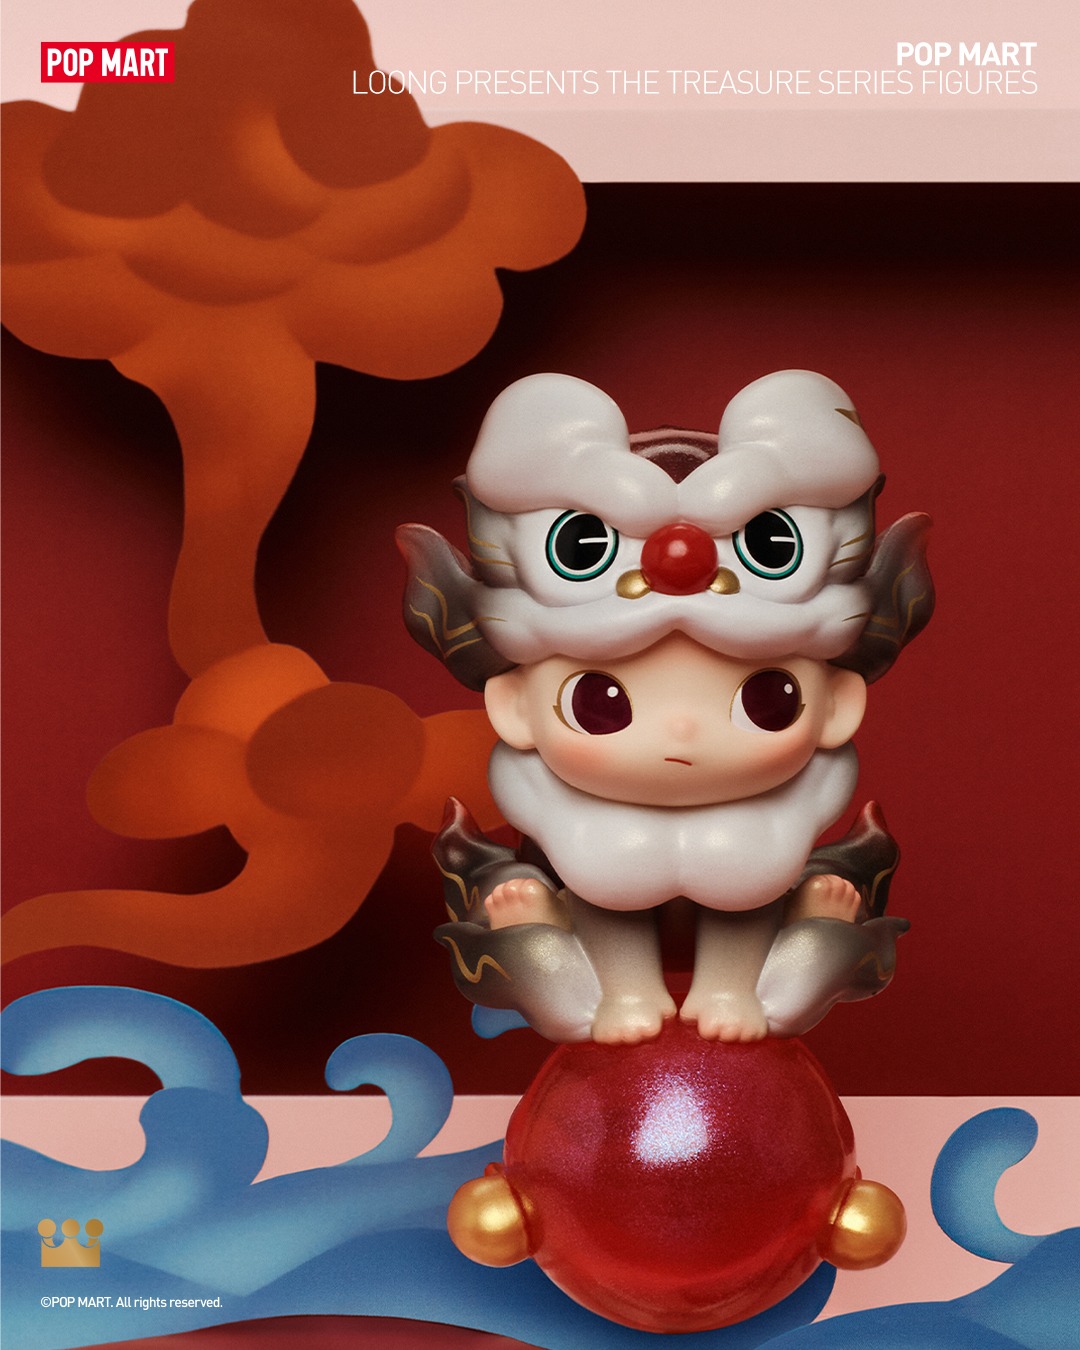 POP MART x Loong Presents the Treasure Blind Box Series - The Toy